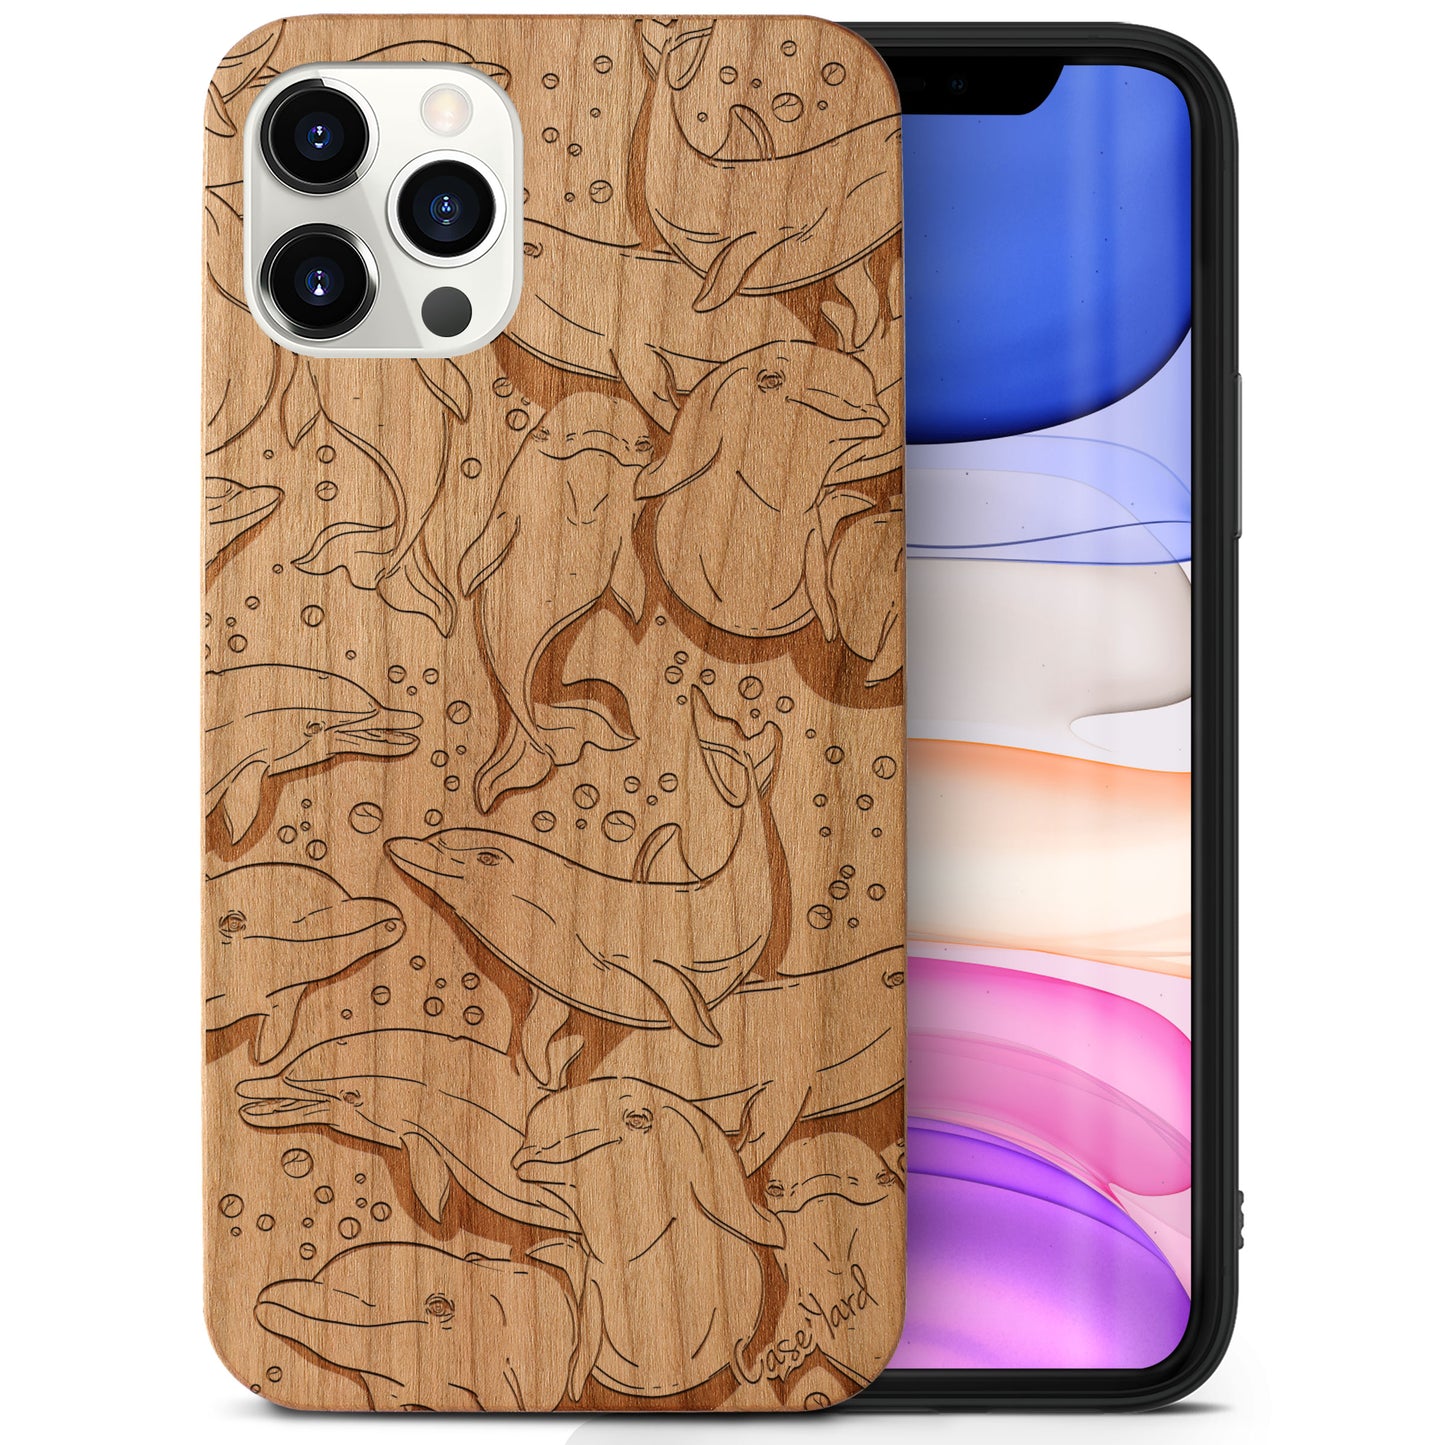 Wooden Cell Phone Case Cover, Laser Engraved case for iPhone & Samsung phone Dolphins Design